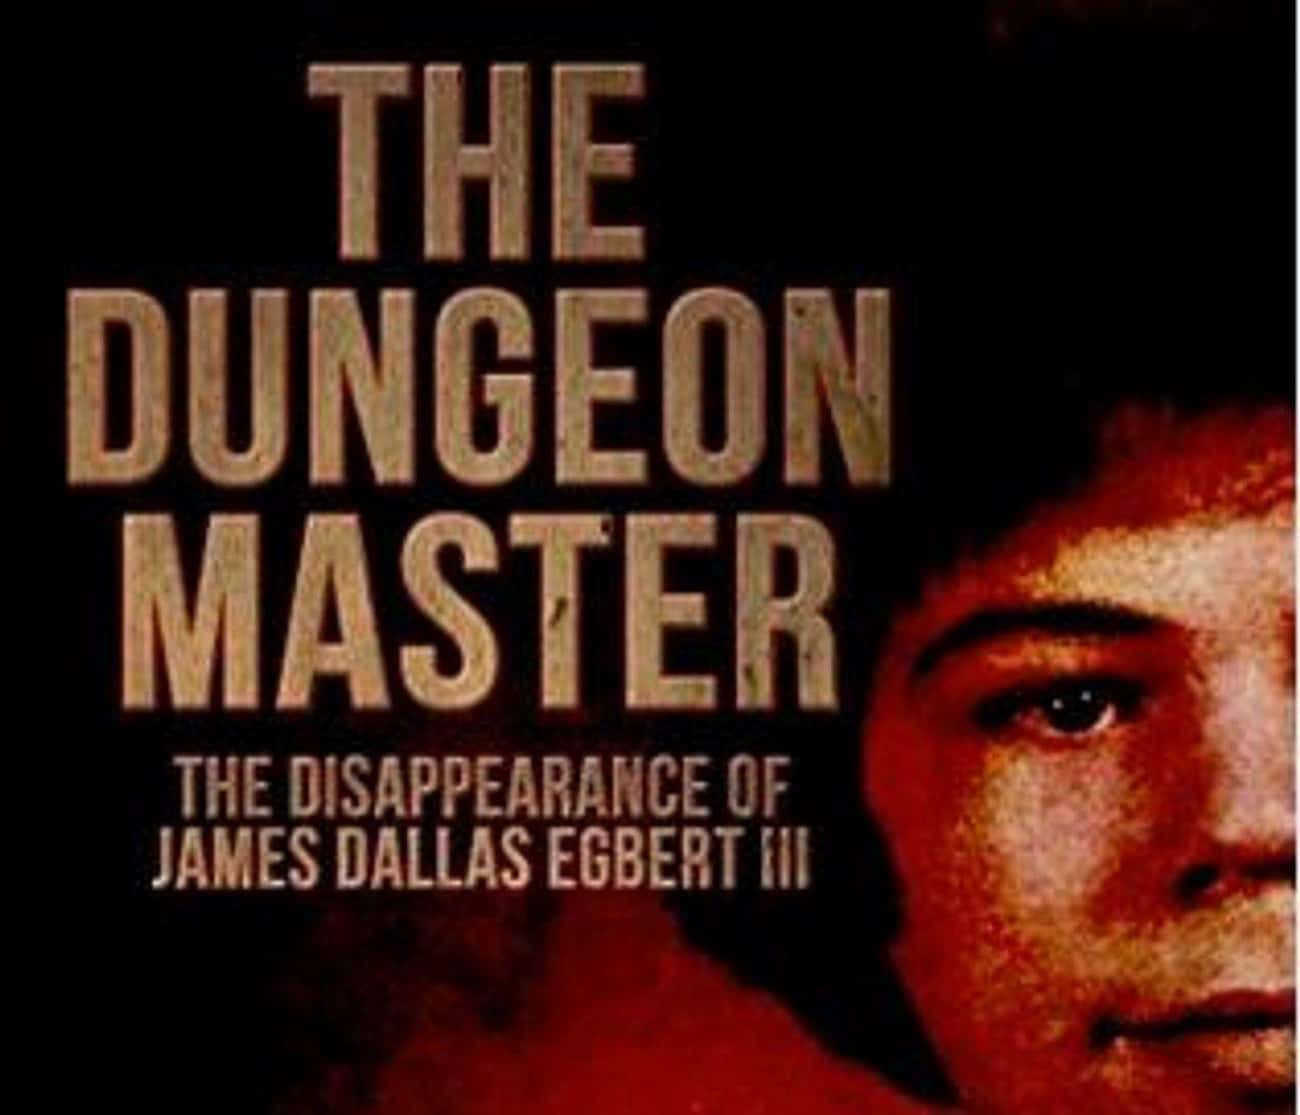 D&D Was Blamed For The Disappearance Of A 16-Year-Old Boy In 1979